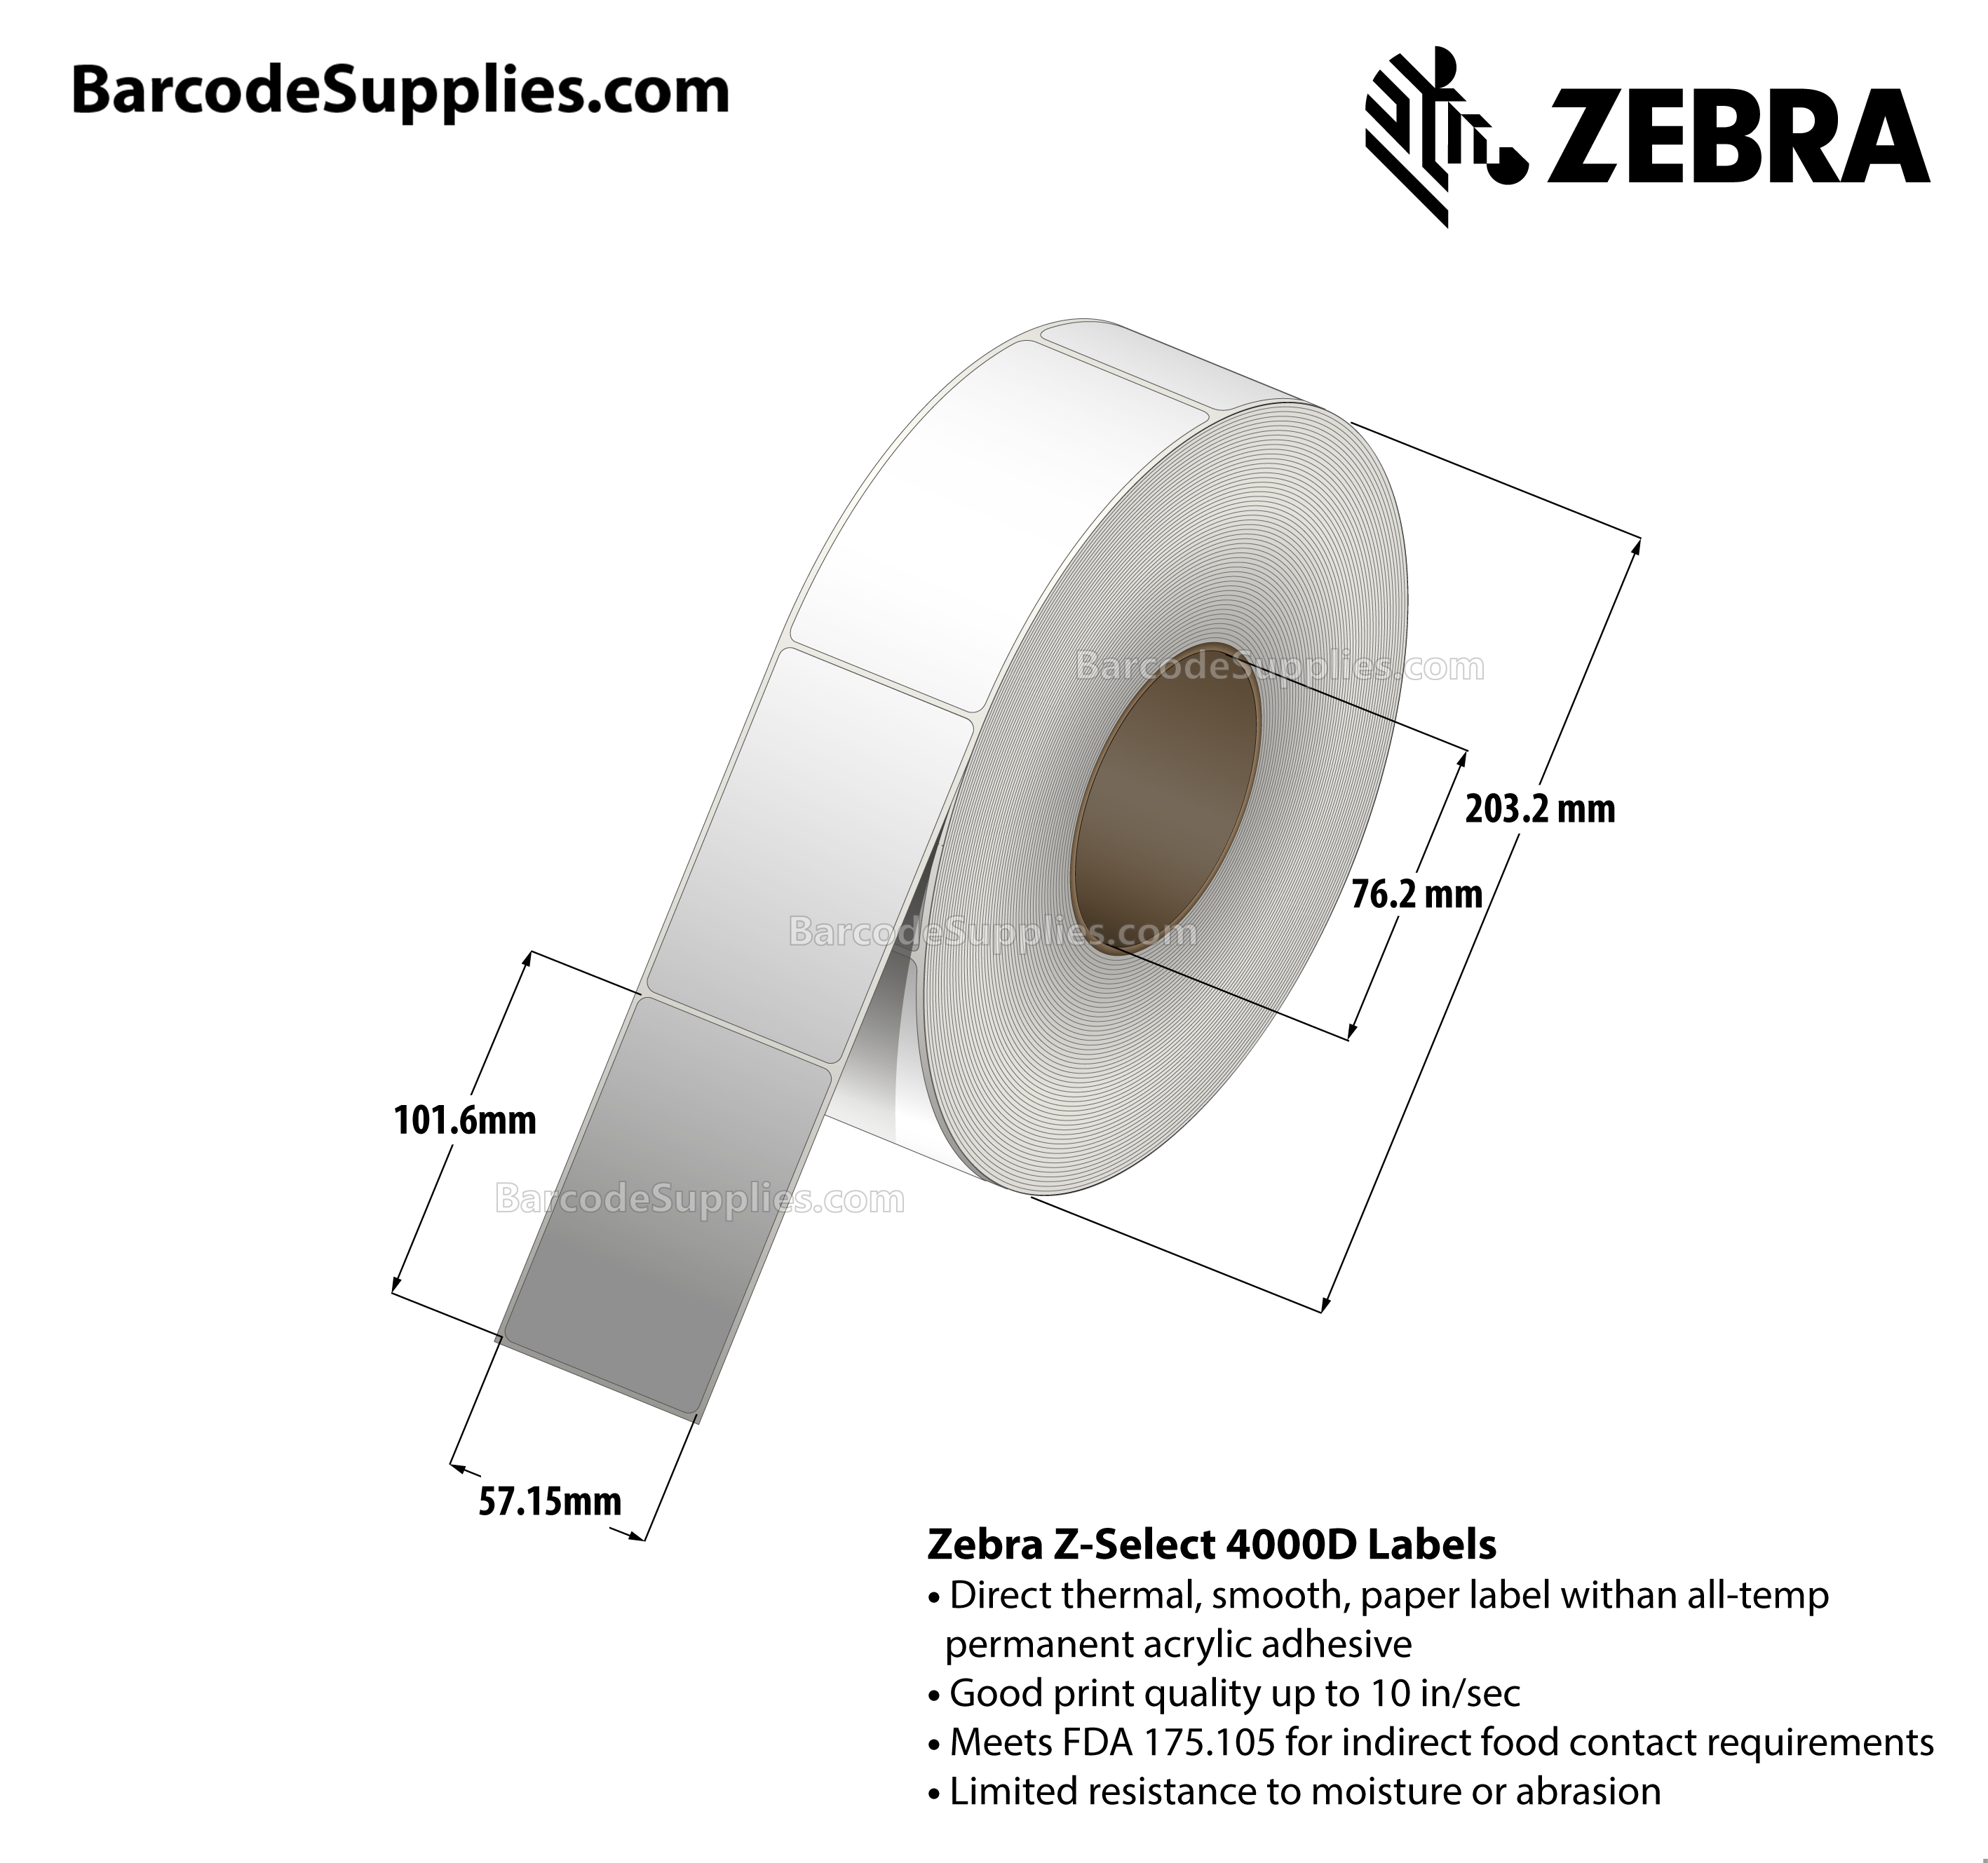 2.25 x 4 Direct Thermal White Z-Select 4000D Labels With All-Temp Adhesive - Not Perforated - 1260 Labels Per Roll - Carton Of 8 Rolls - 10080 Labels Total - MPN: 72278